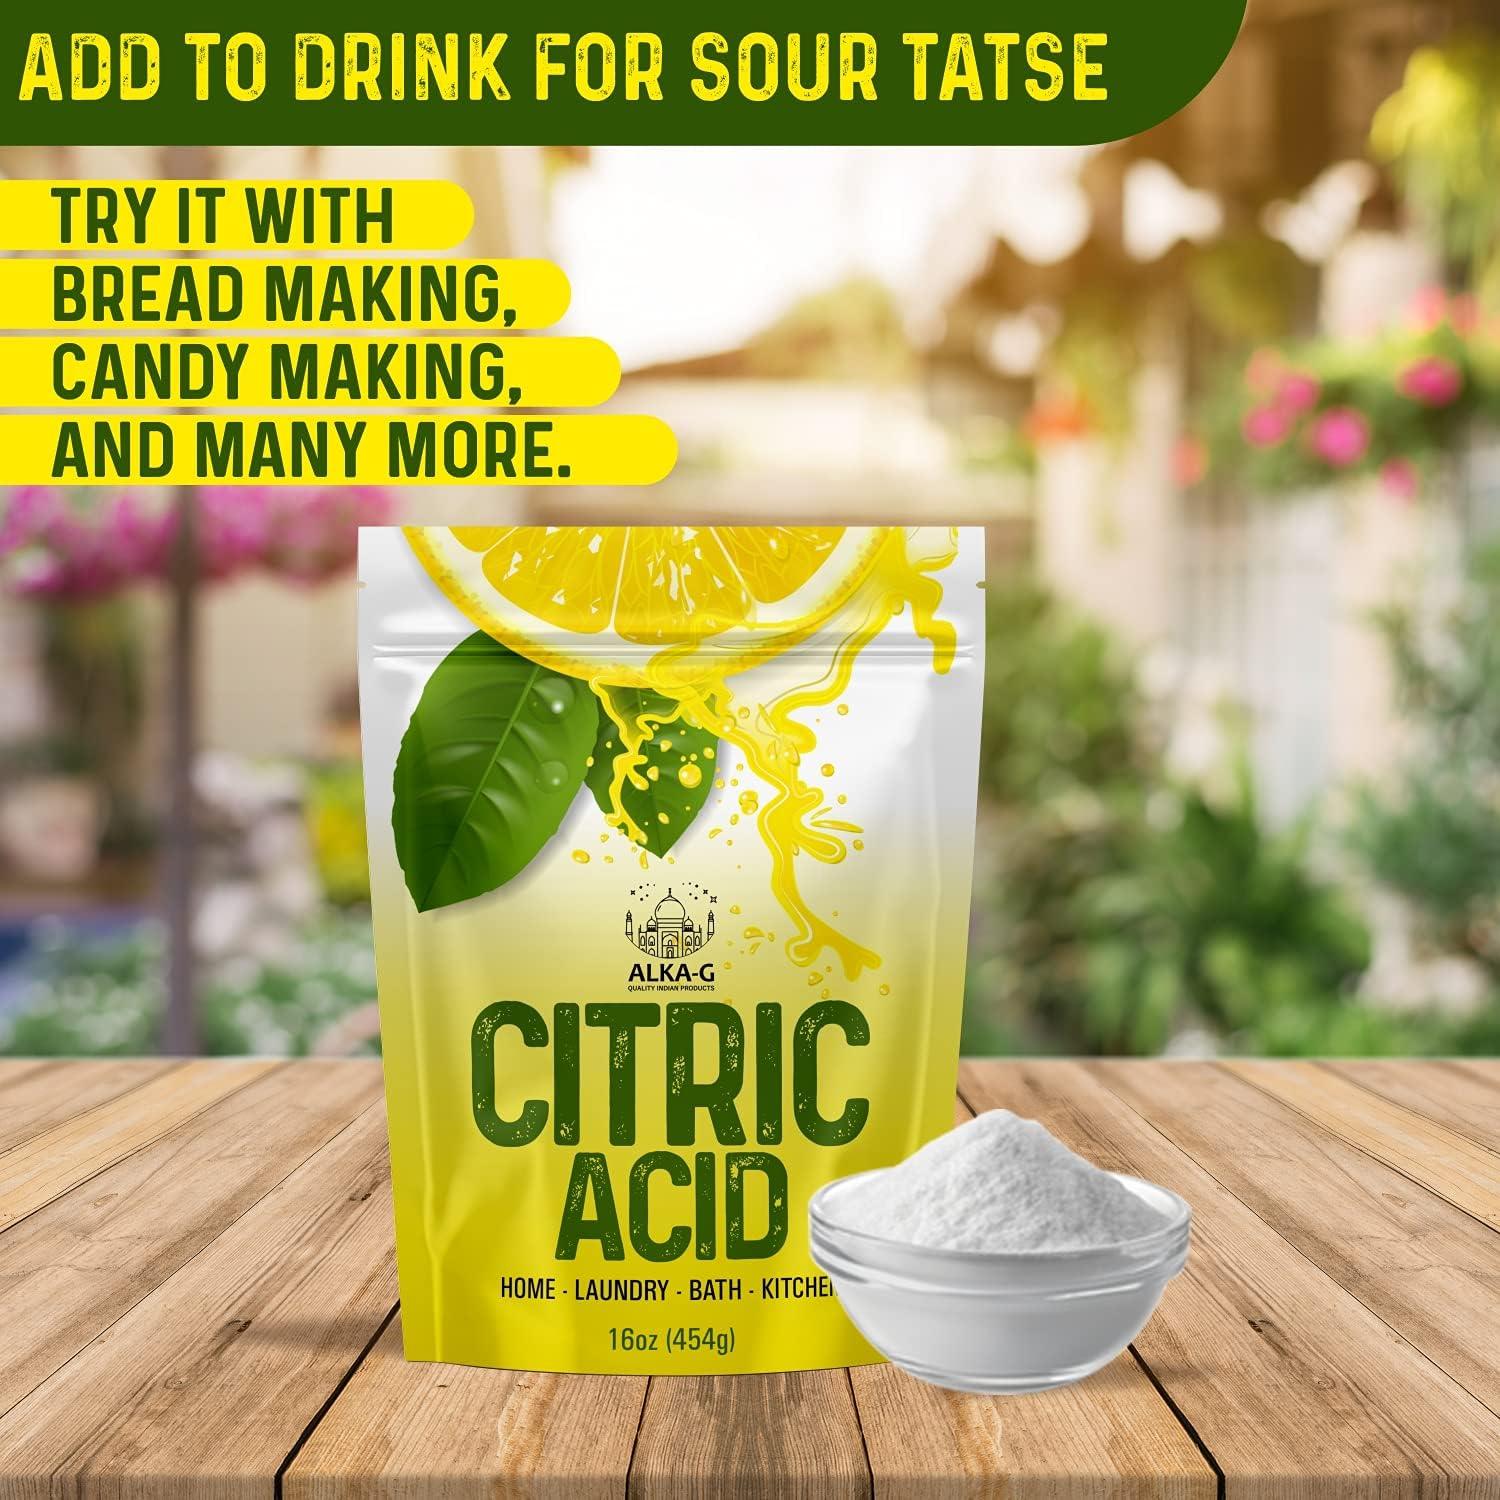 Citric Acid 16 Oz 100% Pure Food Grade  Multi Purpose Citric Acid Powder  for Skincare Cooking Baking & Bath Bombs Resealable Bag by ALKA-G 1 Pound  (Pack of 1)